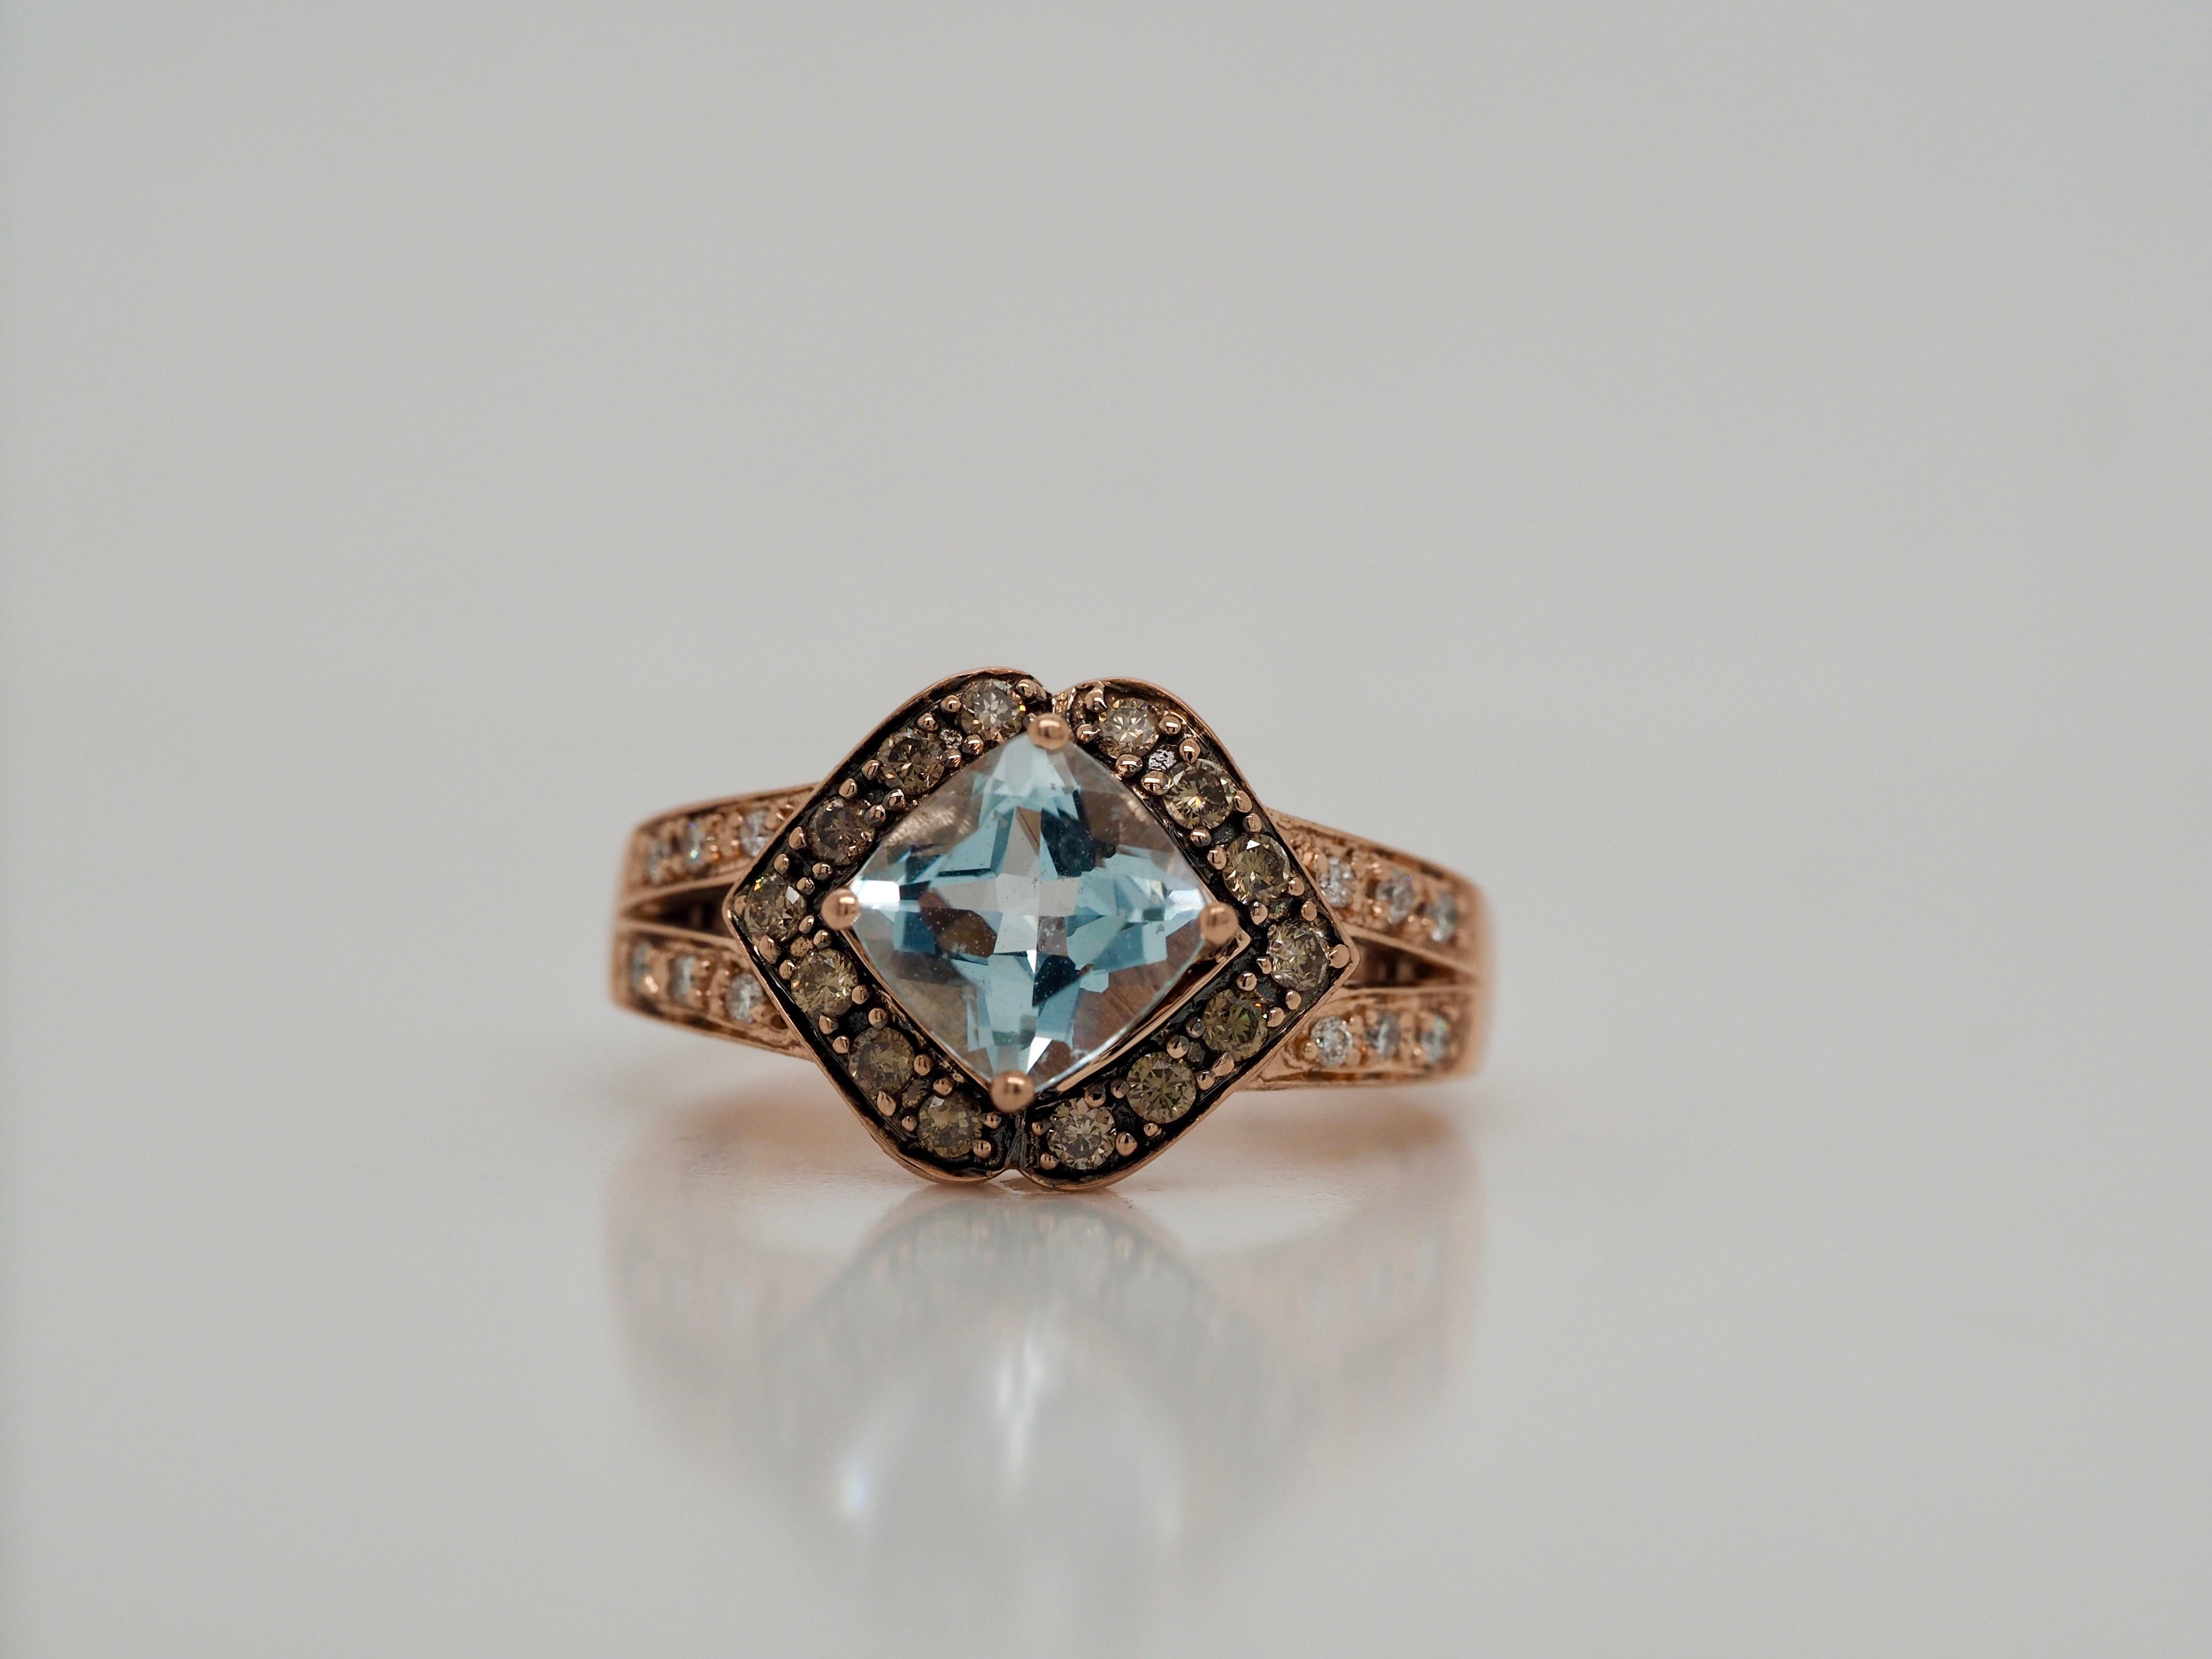 Roberto Ricci 14 Karat Rose Gold Light Blue Topaz and Diamond Ring In Excellent Condition For Sale In Addison, TX